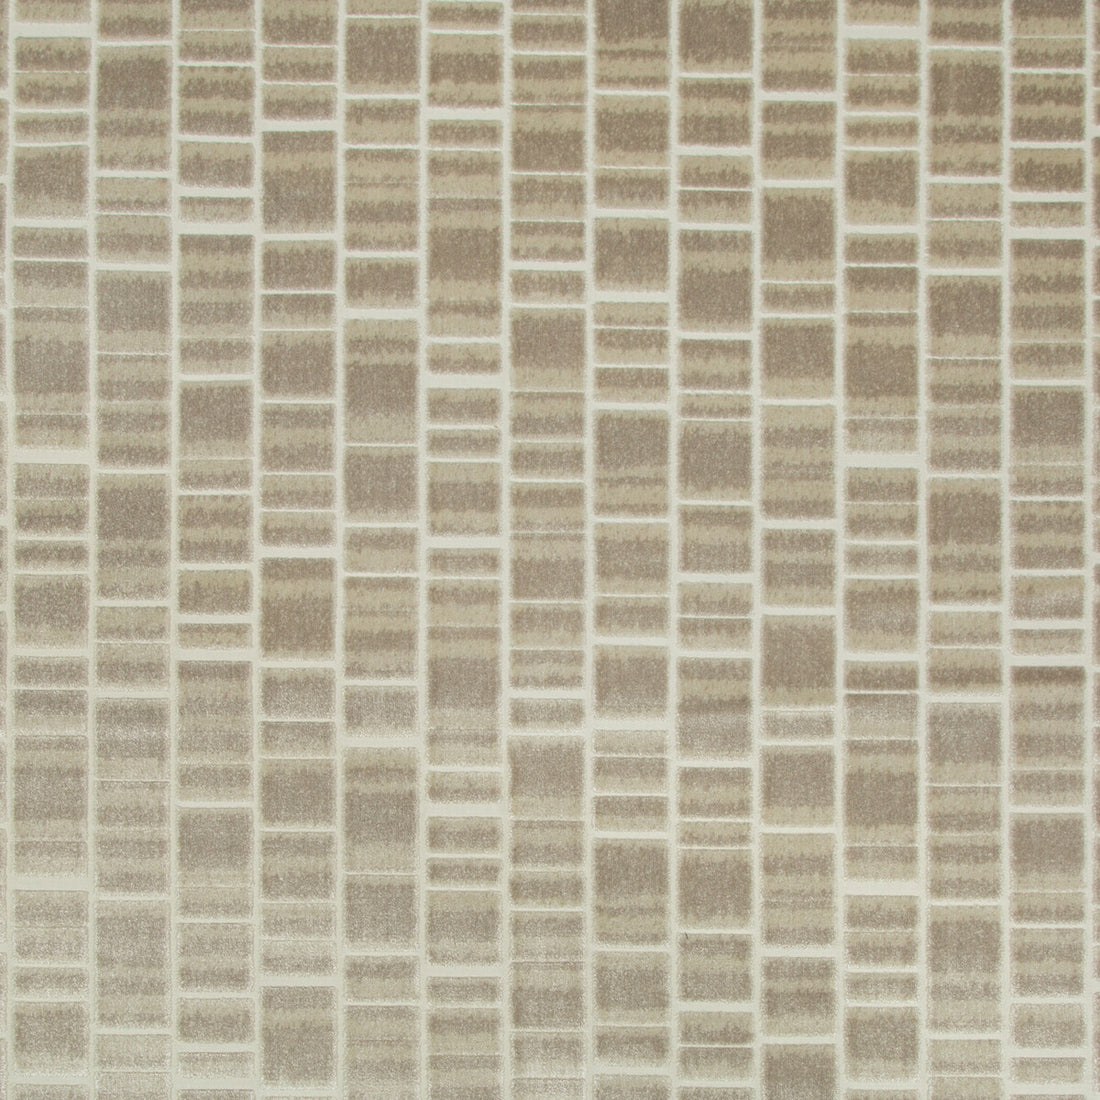 Caisson fabric in dove color - pattern 34847.16.0 - by Kravet Basics in the Thom Filicia Altitude collection